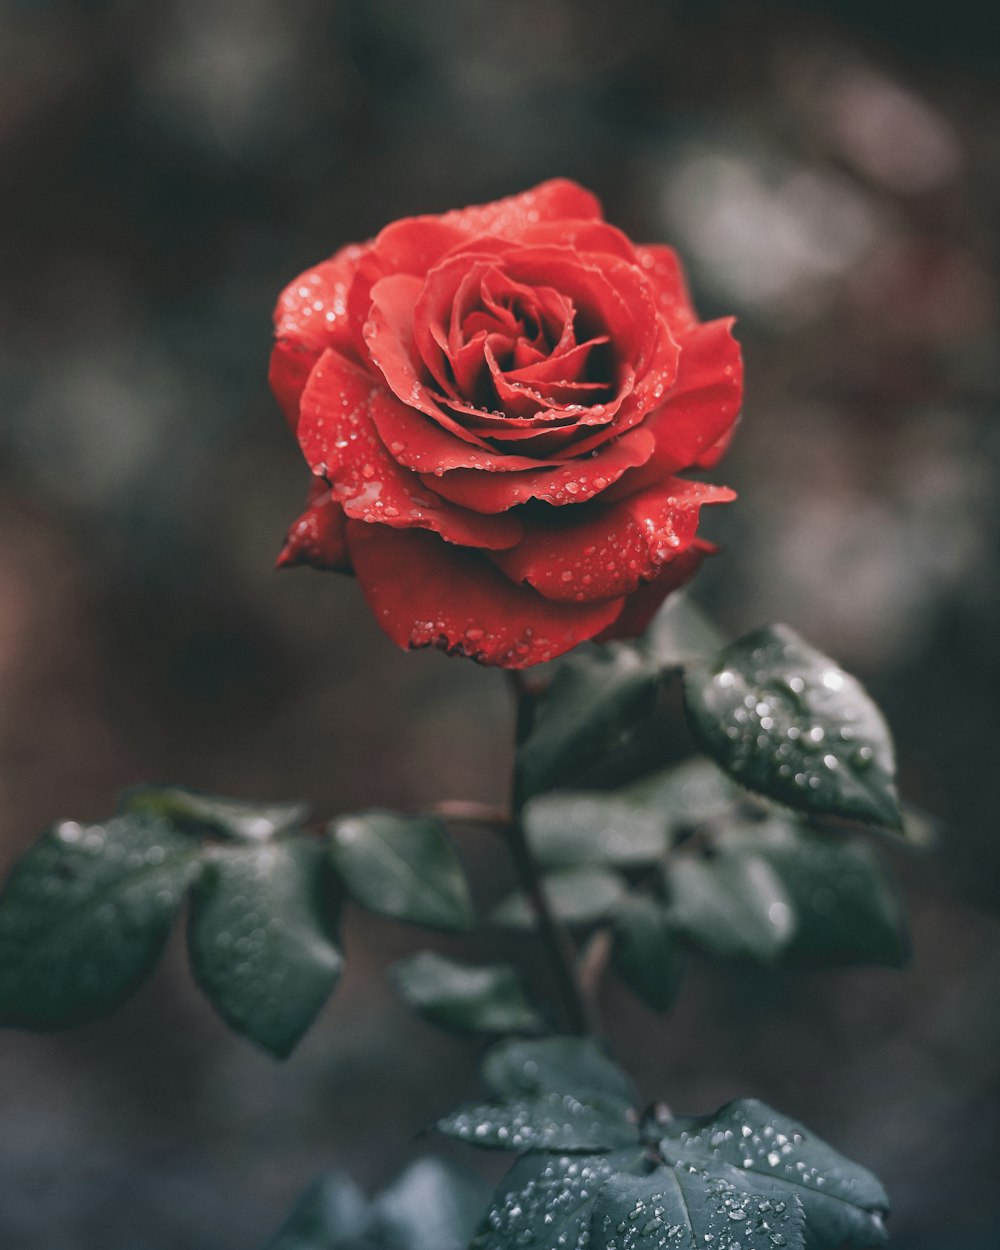 red rose with droplets